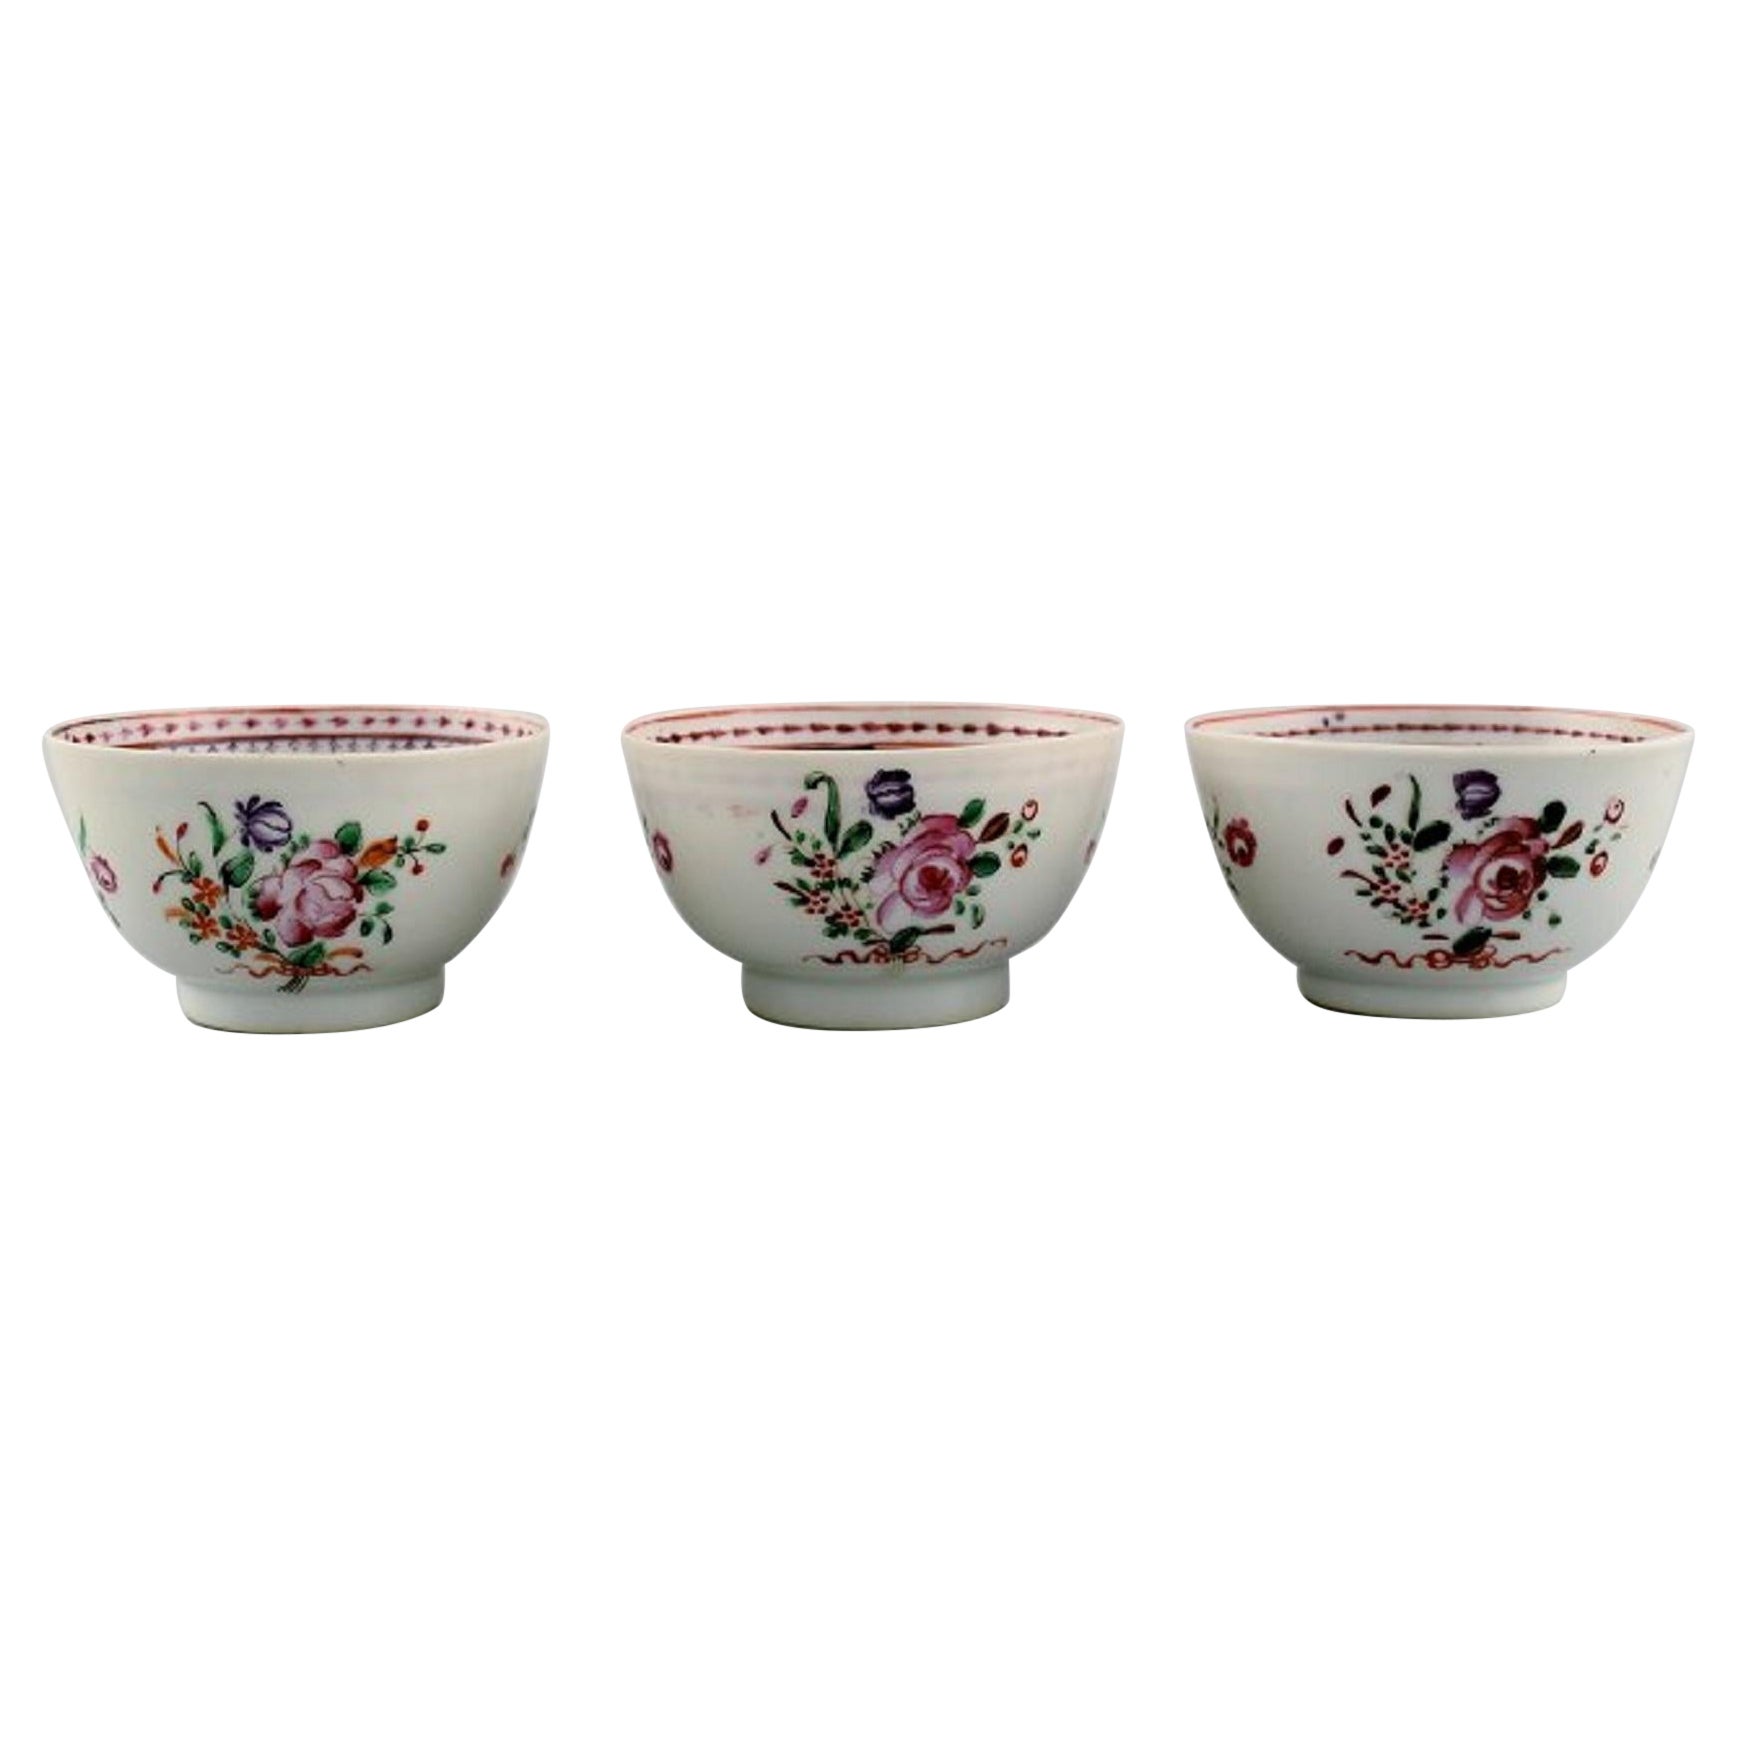 Three Antique Chinese Teacups in Hand-Painted Porcelain, Qian Long '1736-1795' For Sale